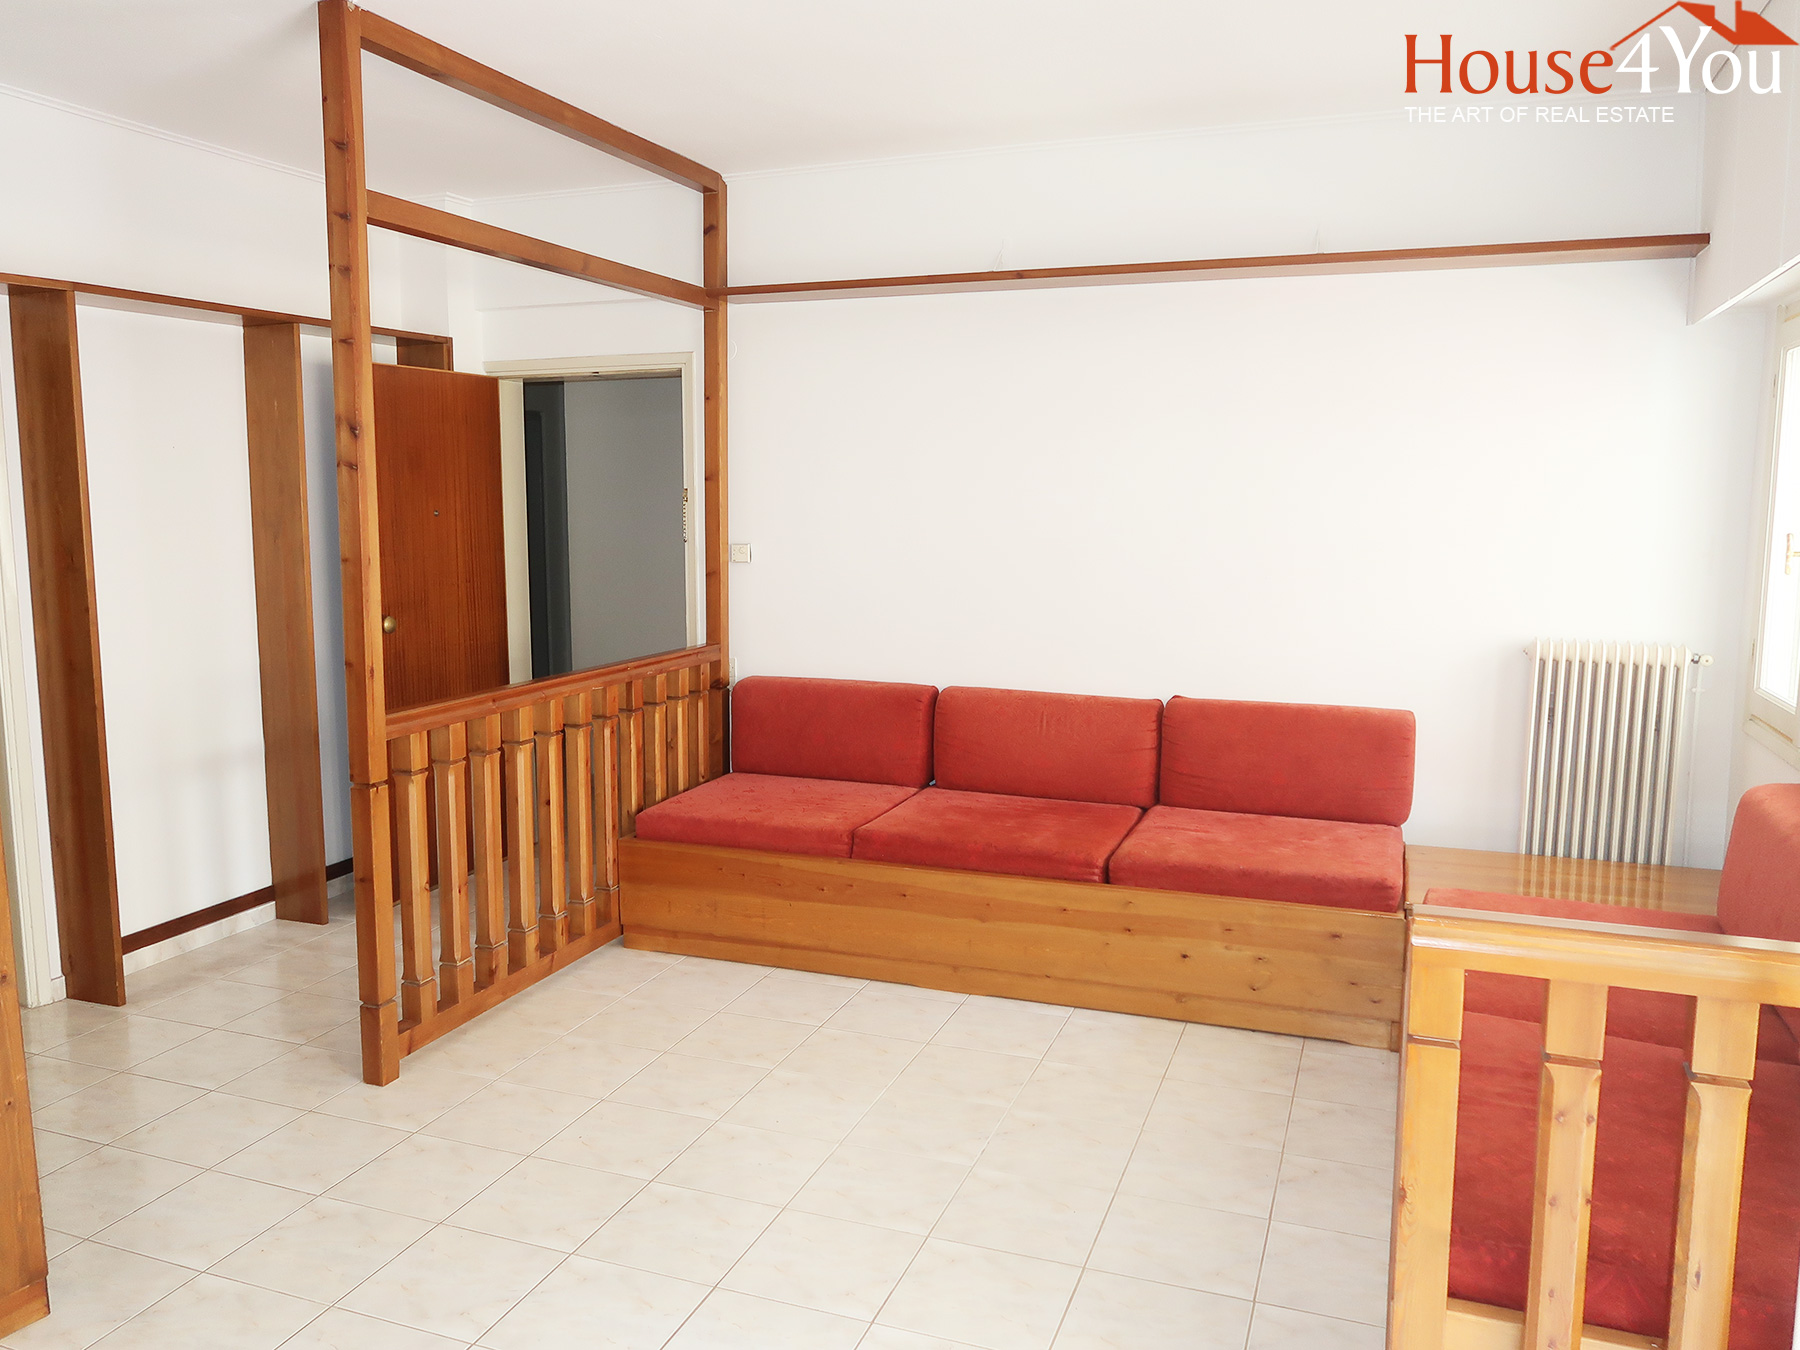 For sale 1 bedroom apartment 55sqm. 1st floor with parking near Platanos in the center of Ioannina 